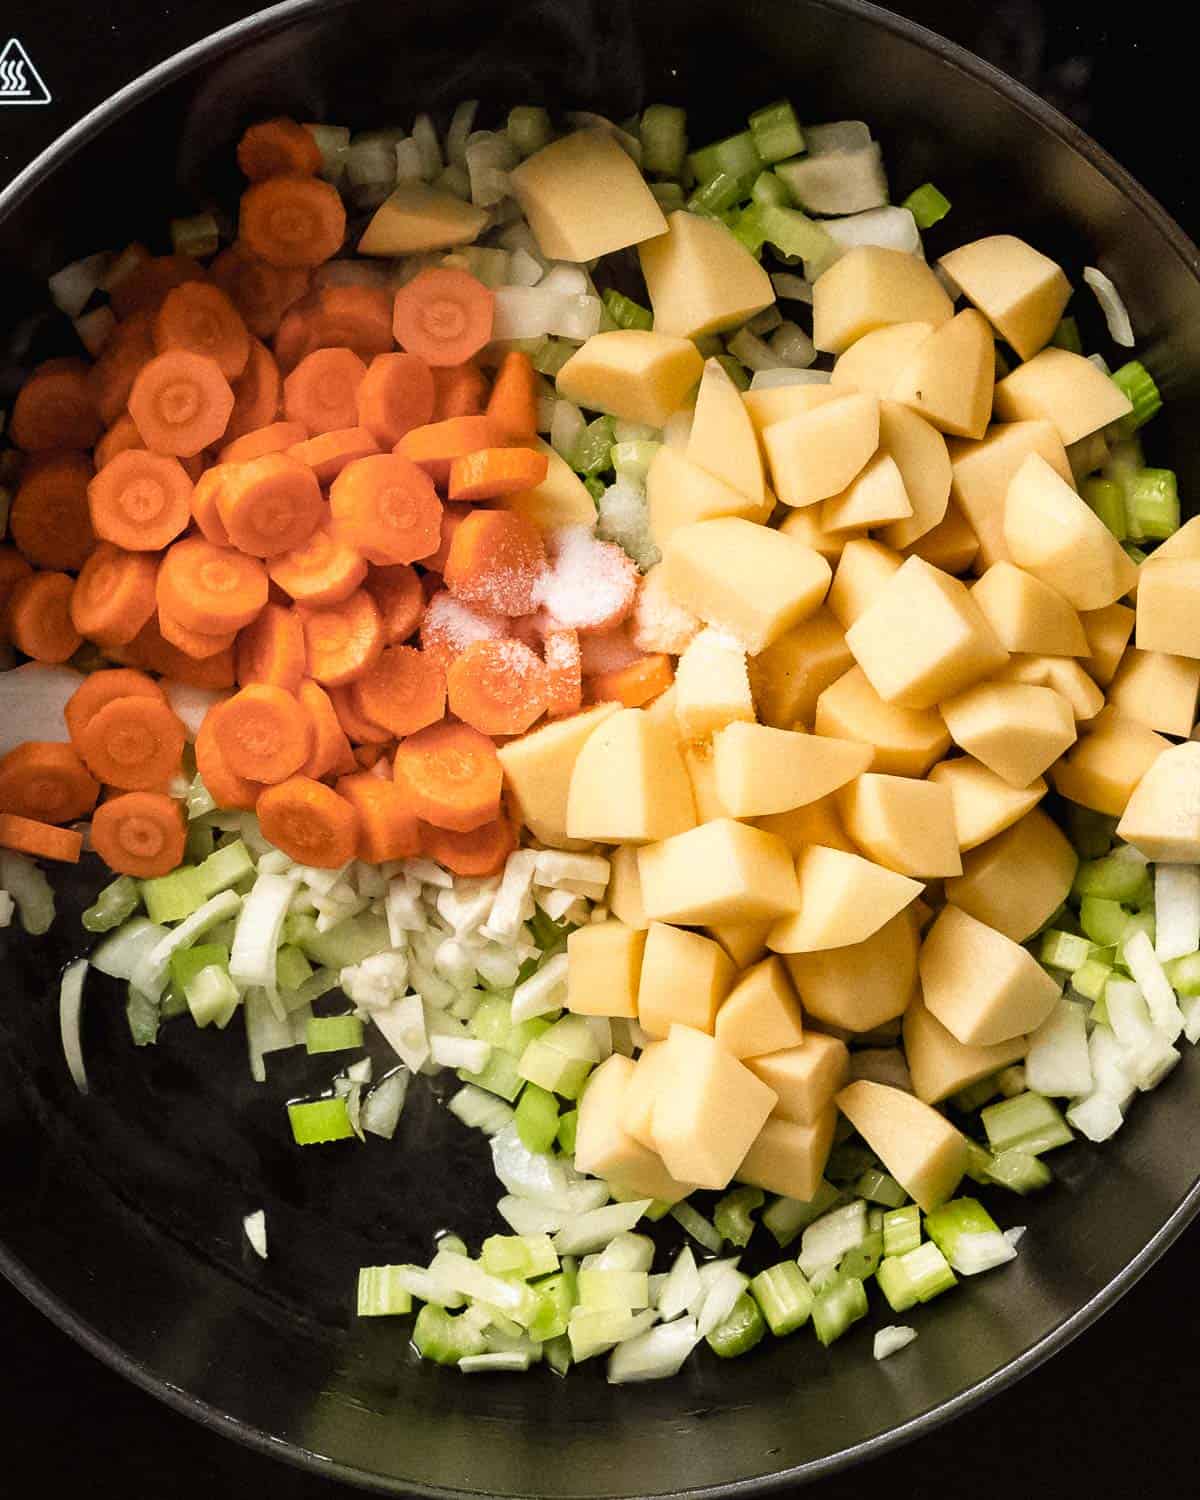 onion, celery, cubed potatoes, chopped carrots and salt in a pan.